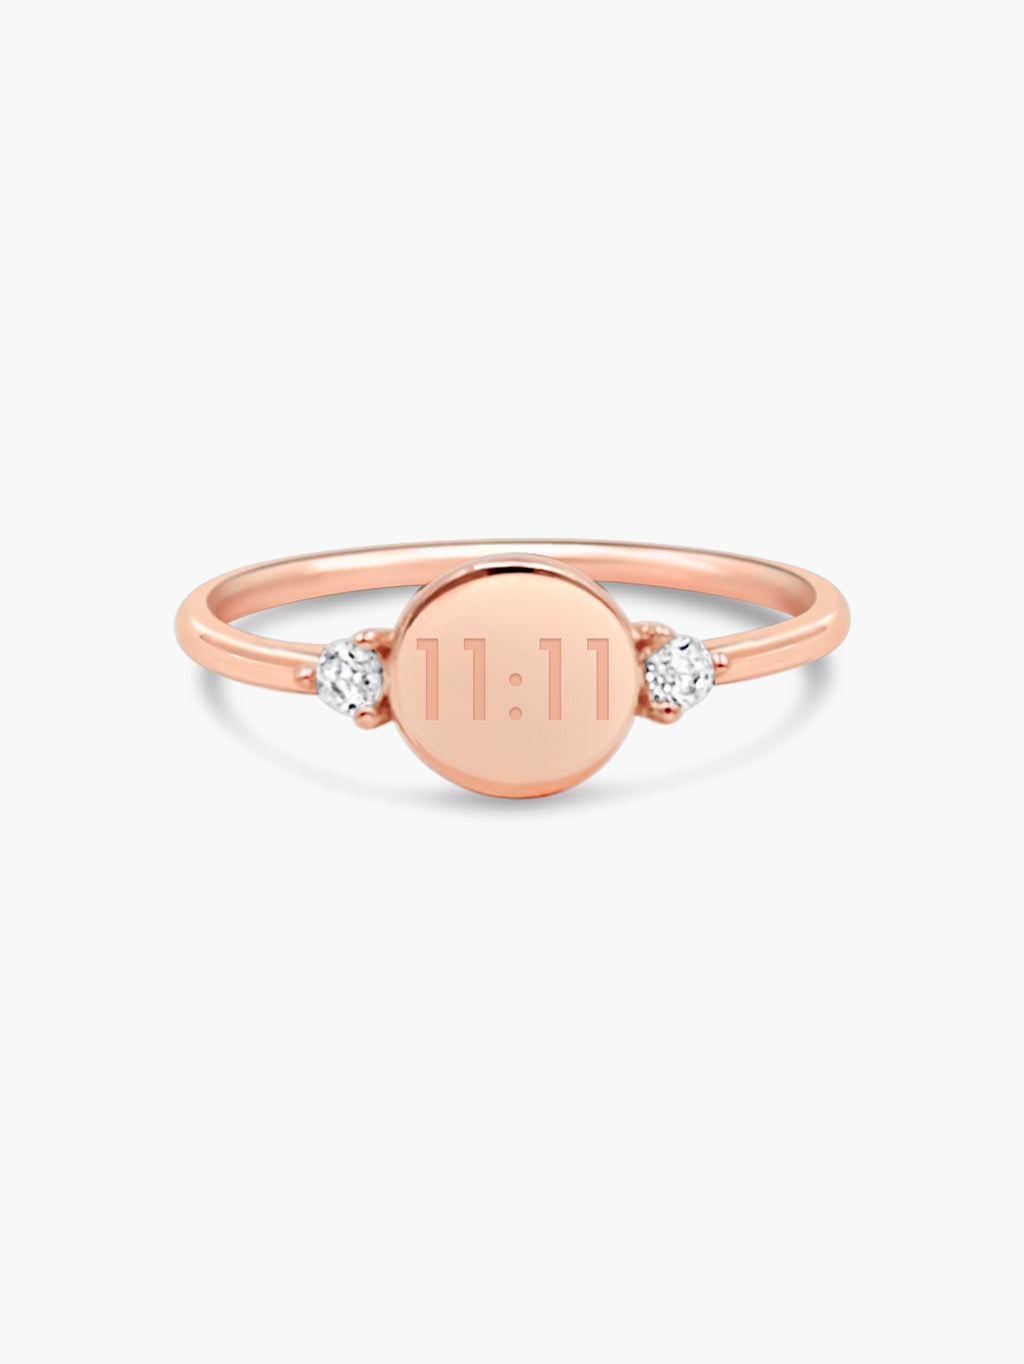 rose gold disc ring with engravings